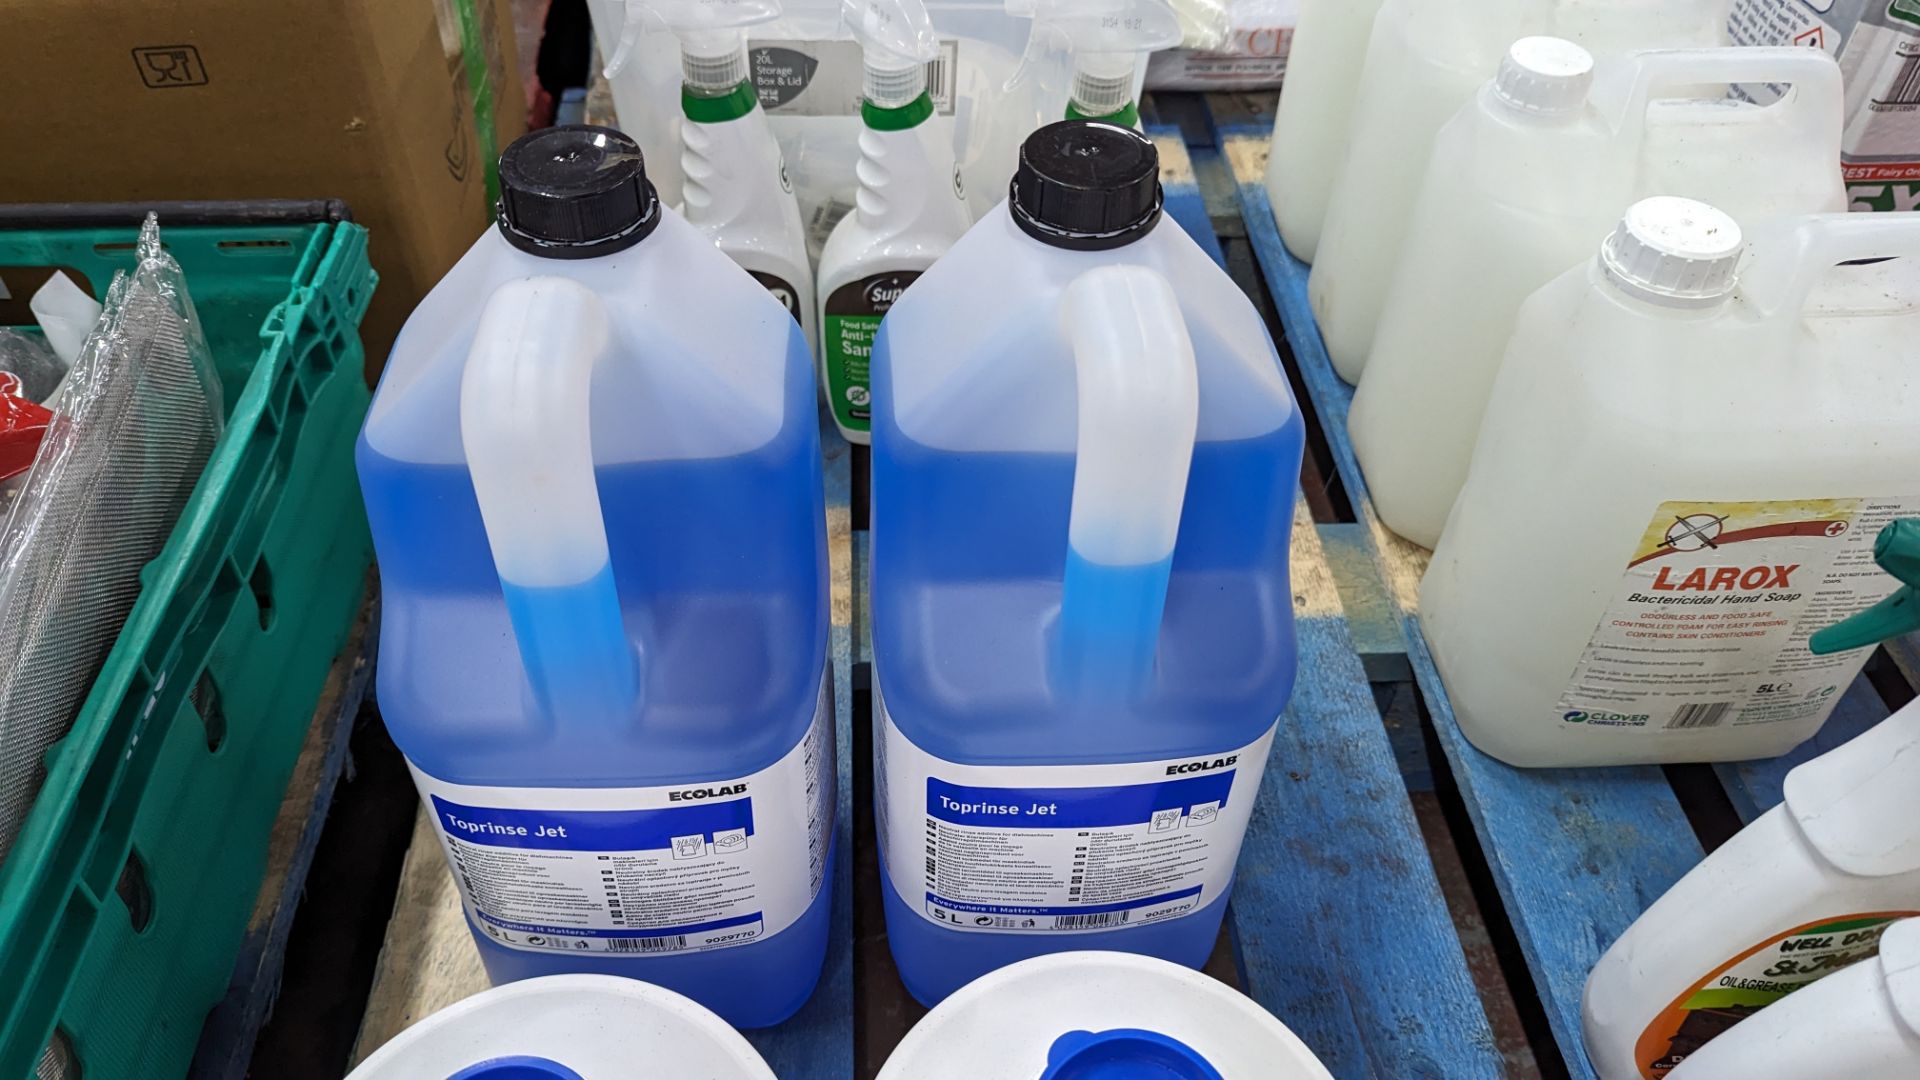 The contents of a pallet of cleaning fluids/solutions - Image 9 of 12